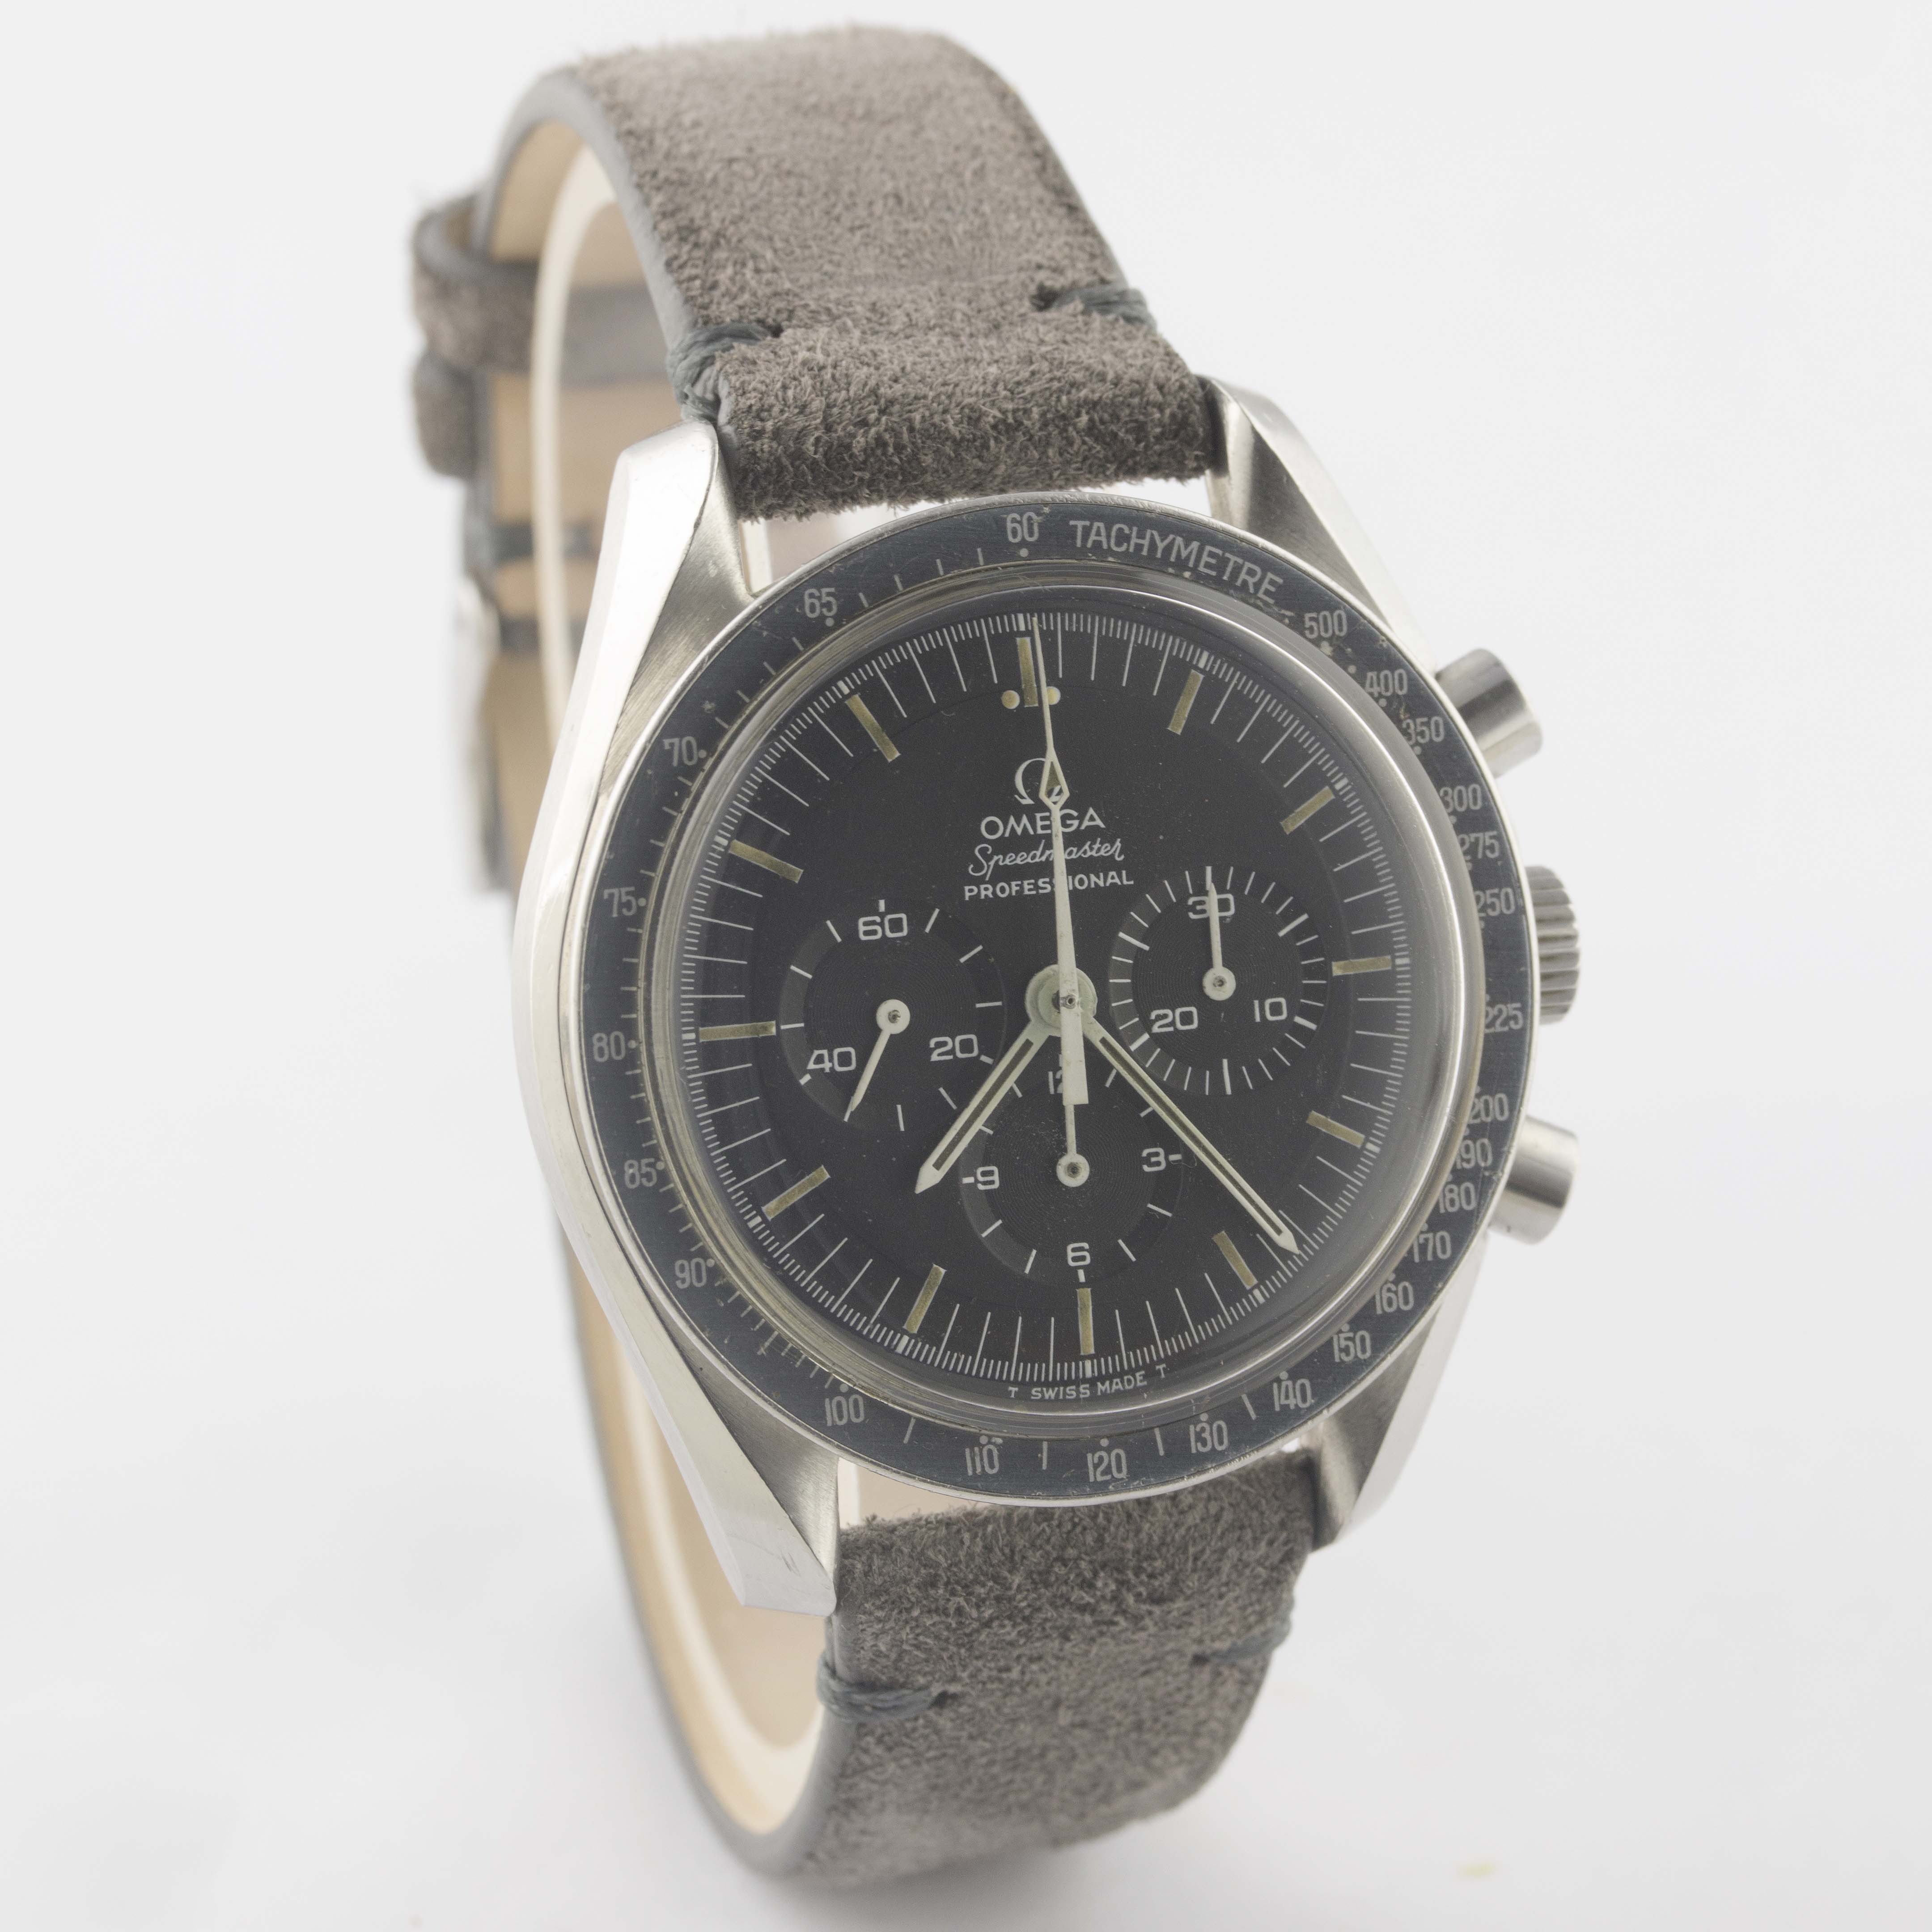 A RARE GENTLEMAN'S STAINLESS STEEL OMEGA SPEEDMASTER PROFESSIONAL CHRONOGRAPH WRIST WATCH DATED - Image 7 of 12